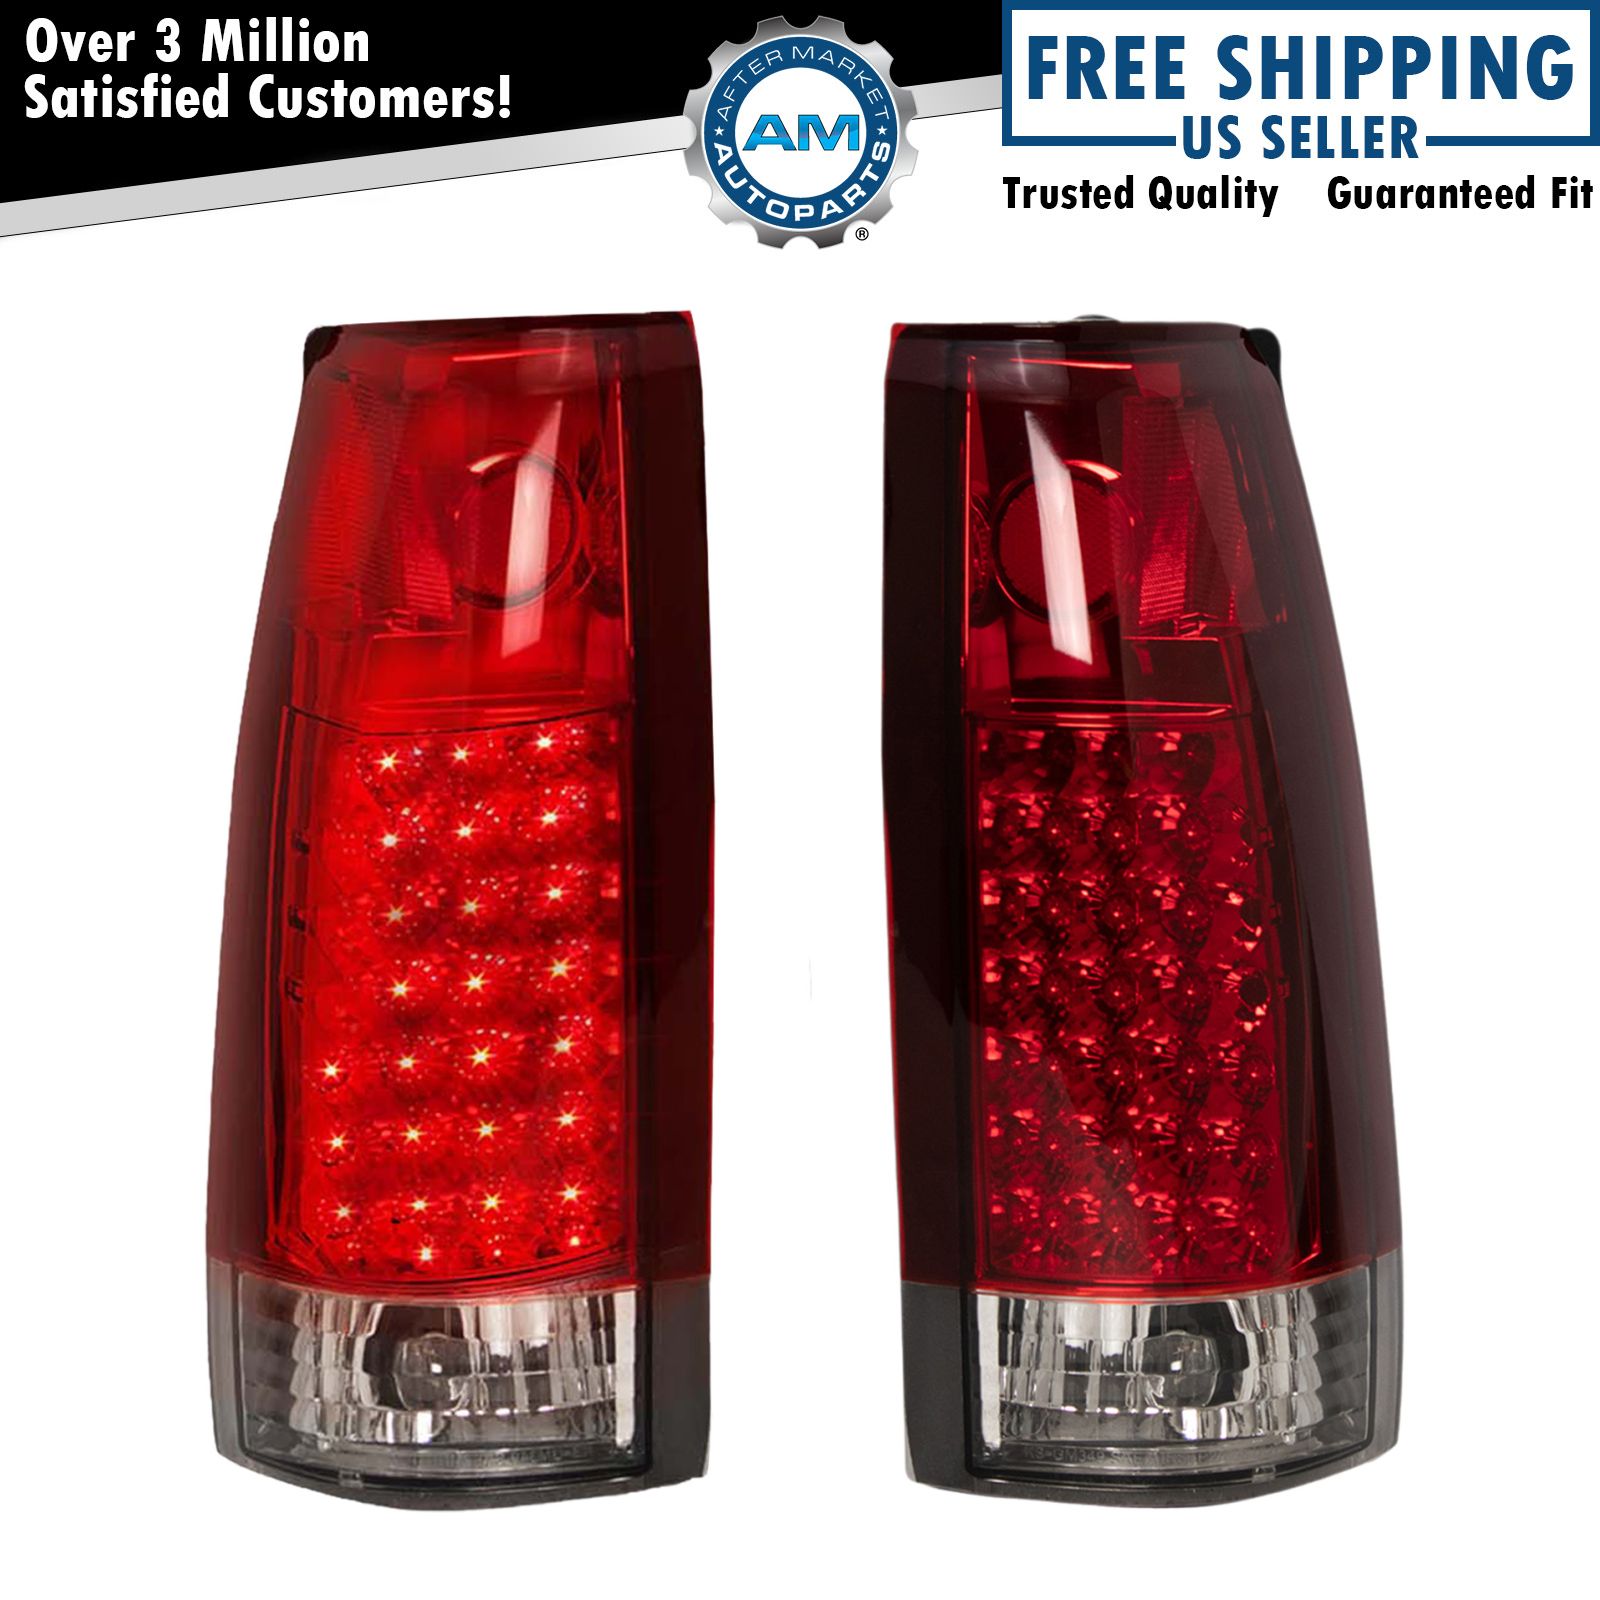 Performance LED Tail Light Red & Clear Lens for Chevrolet GMC Truck New